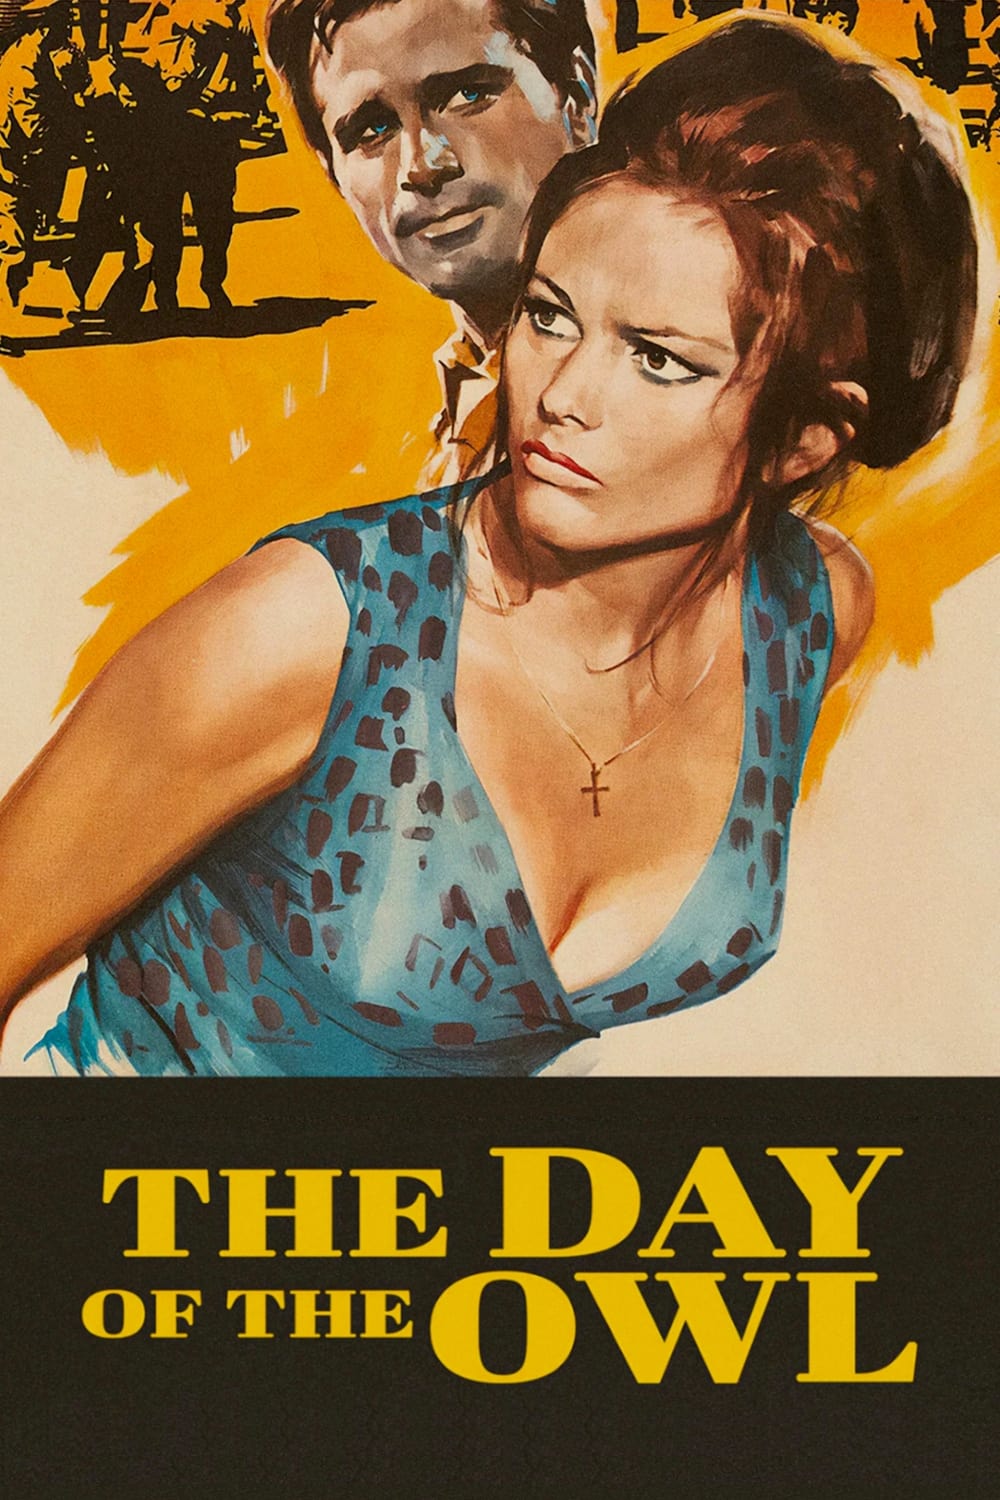 The Day of the Owl (1968)